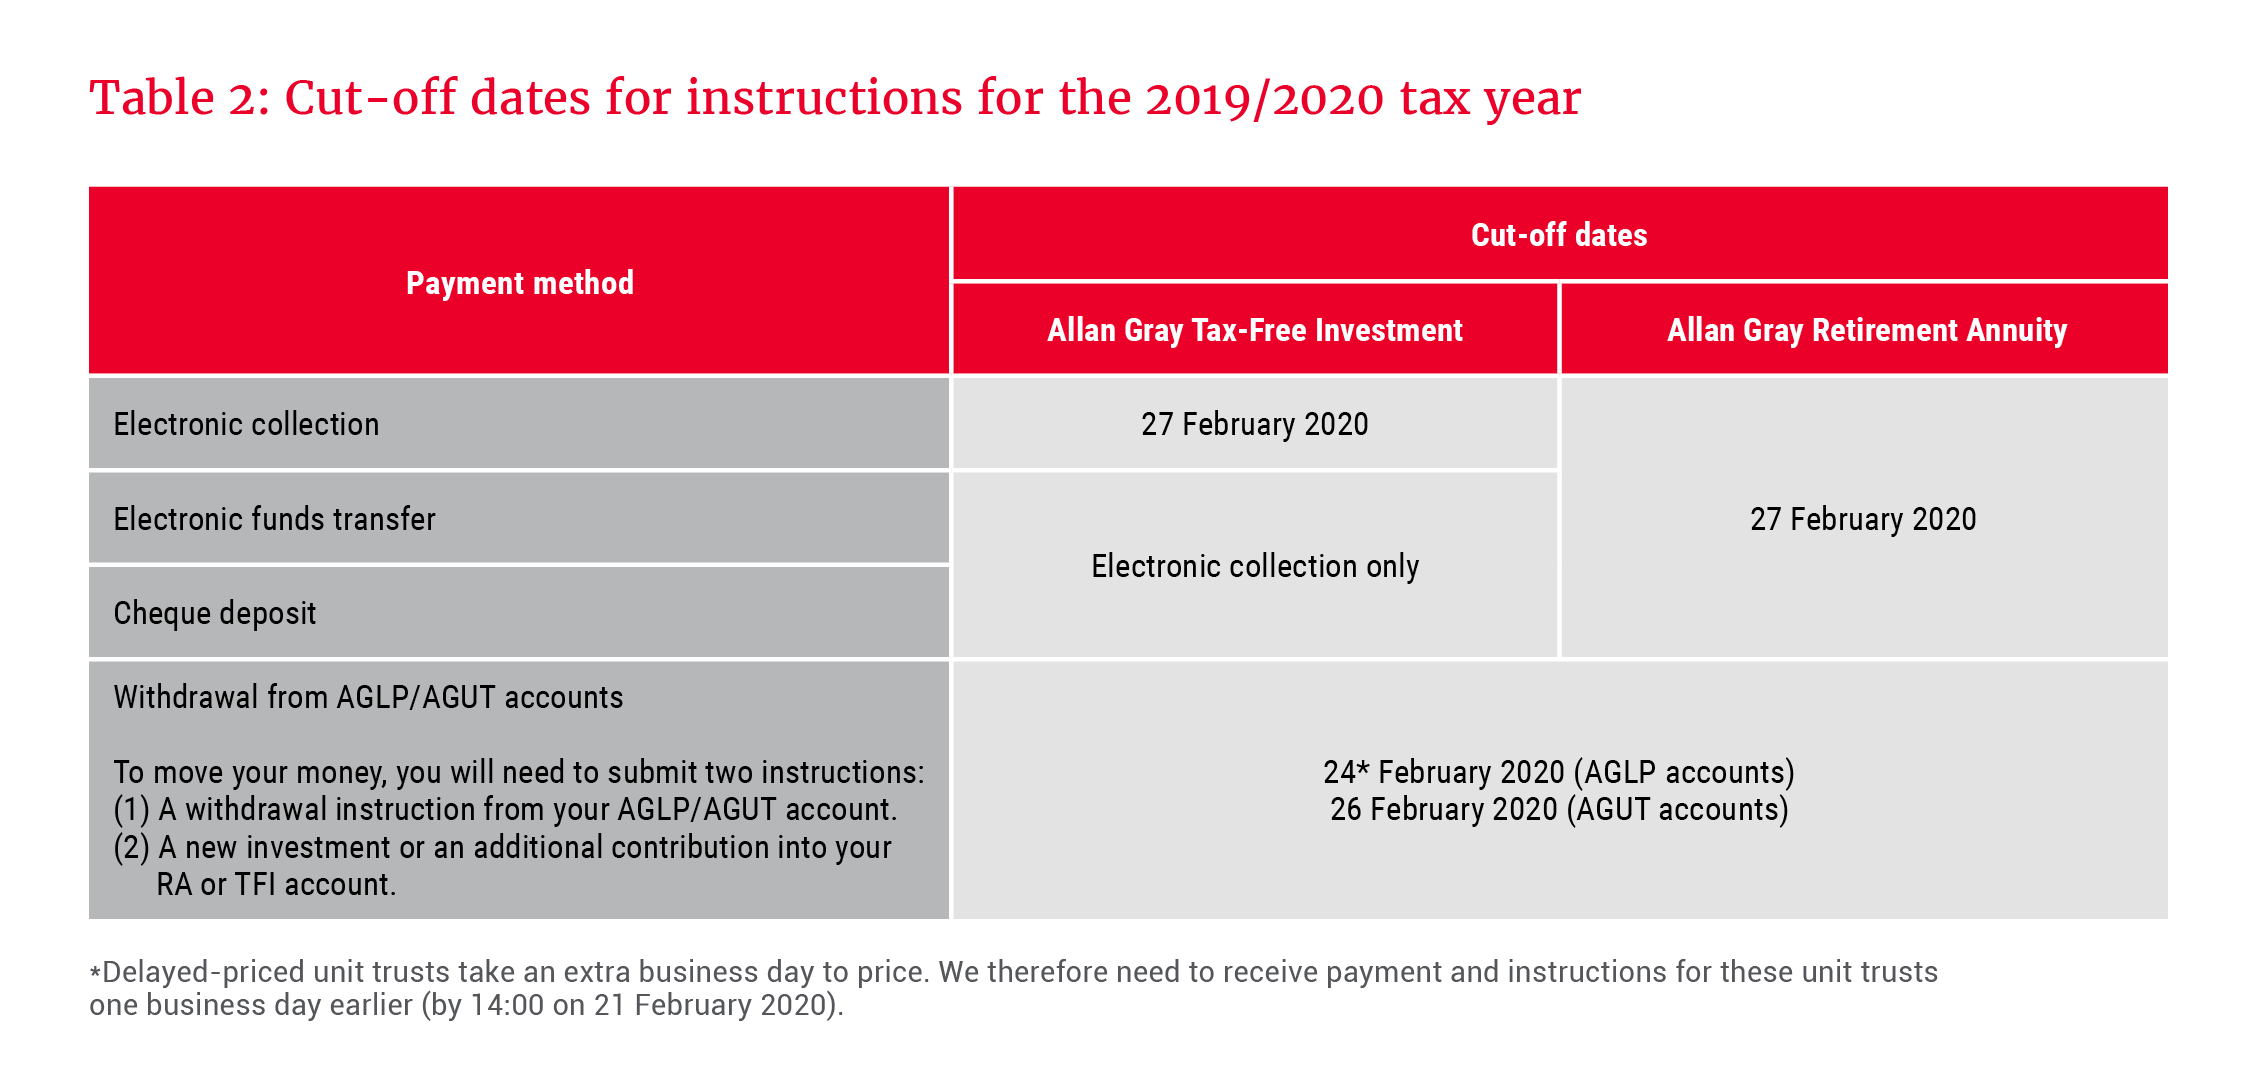 Cut-off dates for instructions for the 2019/2020 tax year - Allan Gray